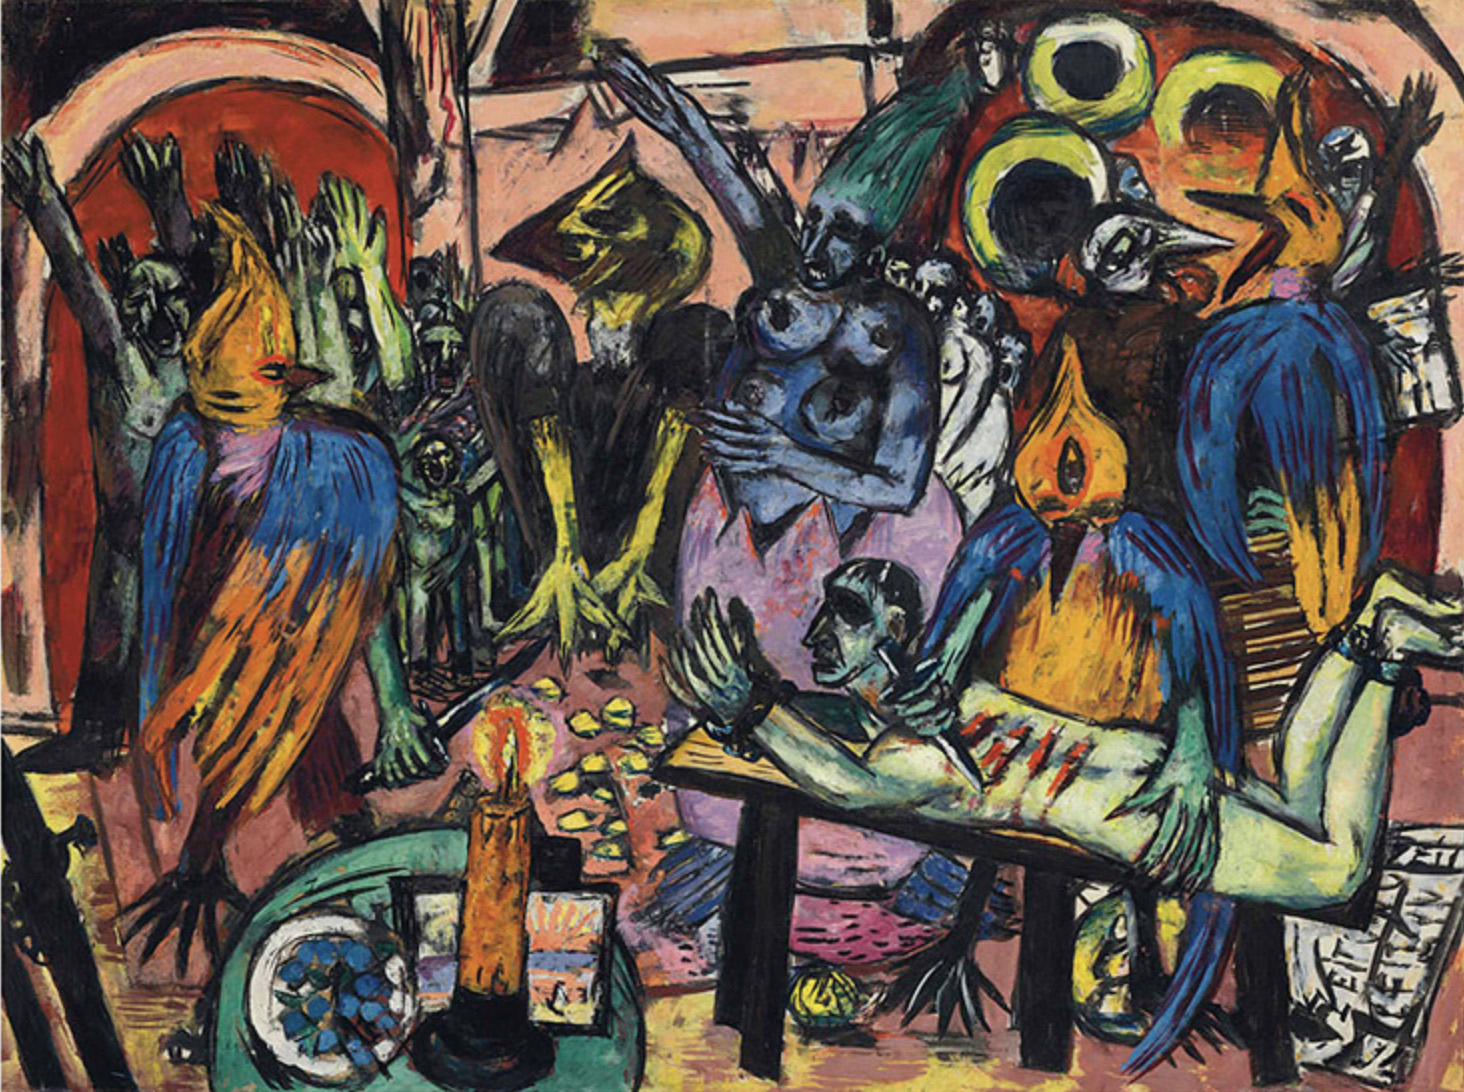 Max Beckmann: The Driving Force of the German Market